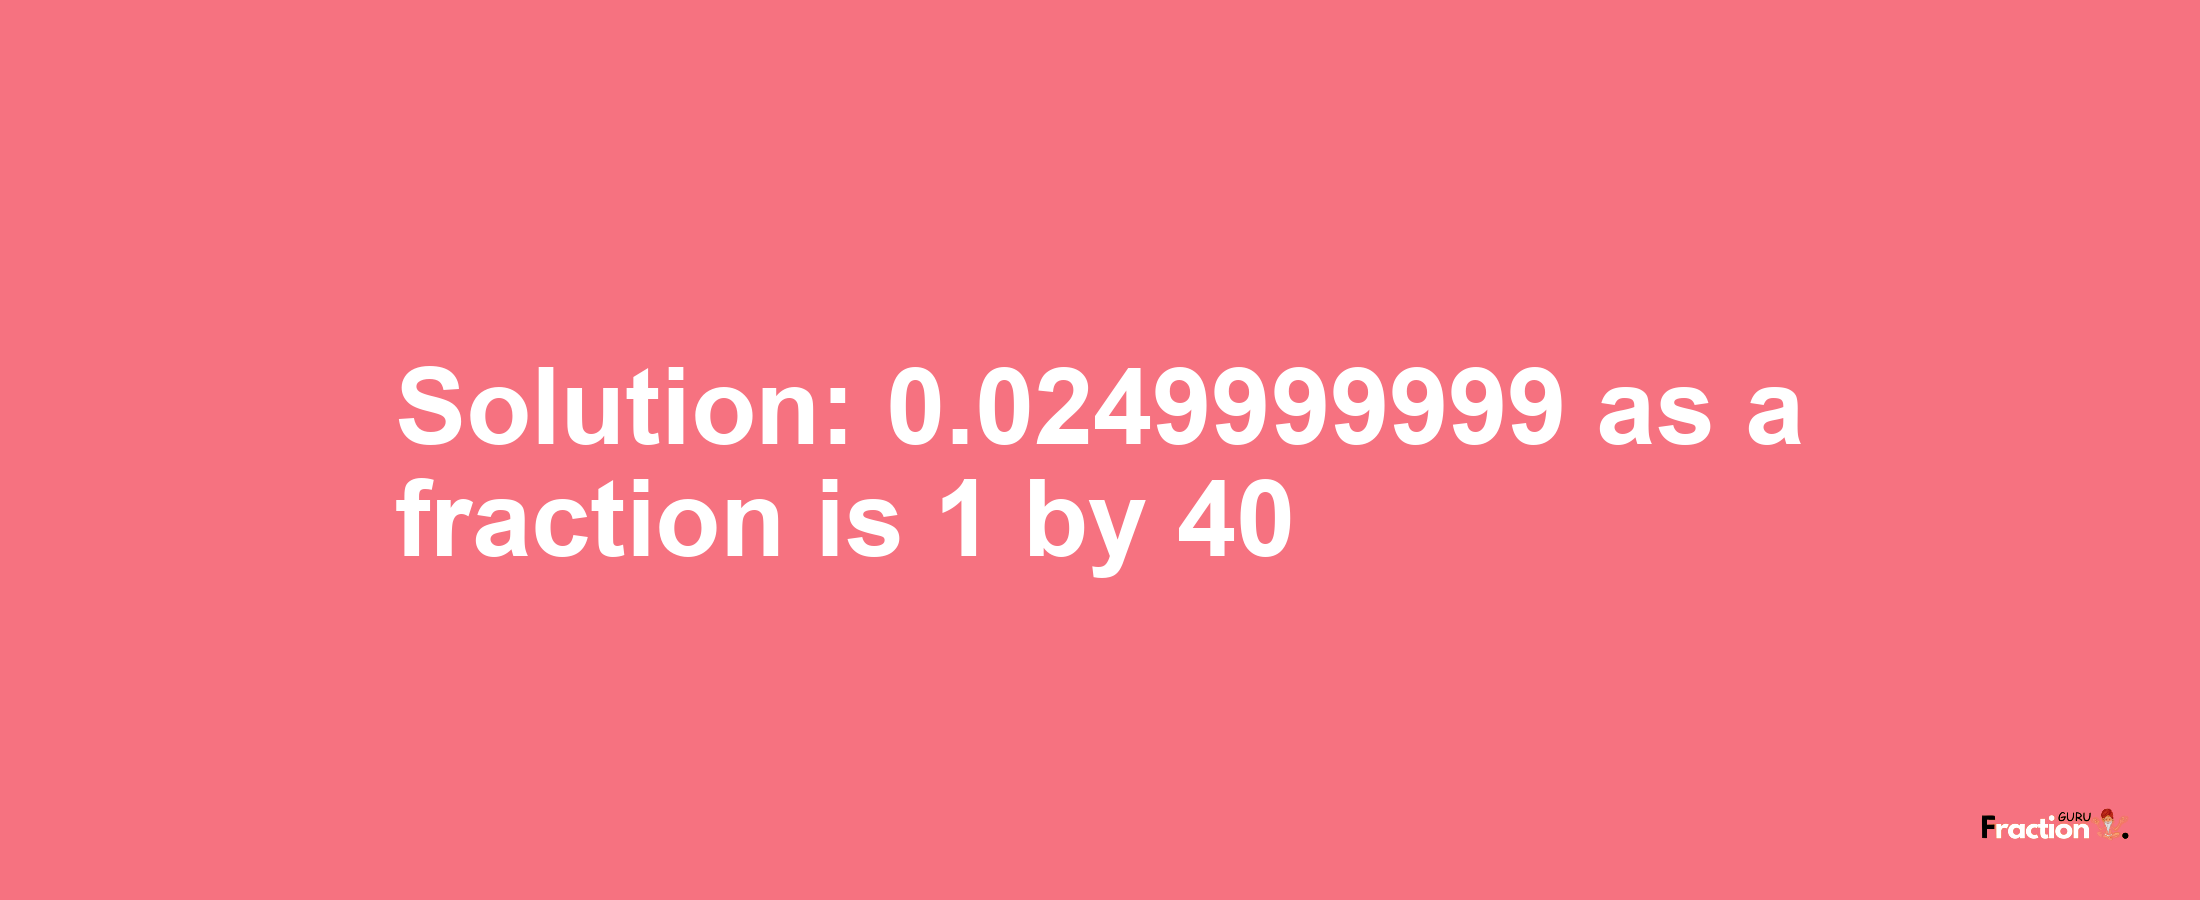 Solution:0.0249999999 as a fraction is 1/40